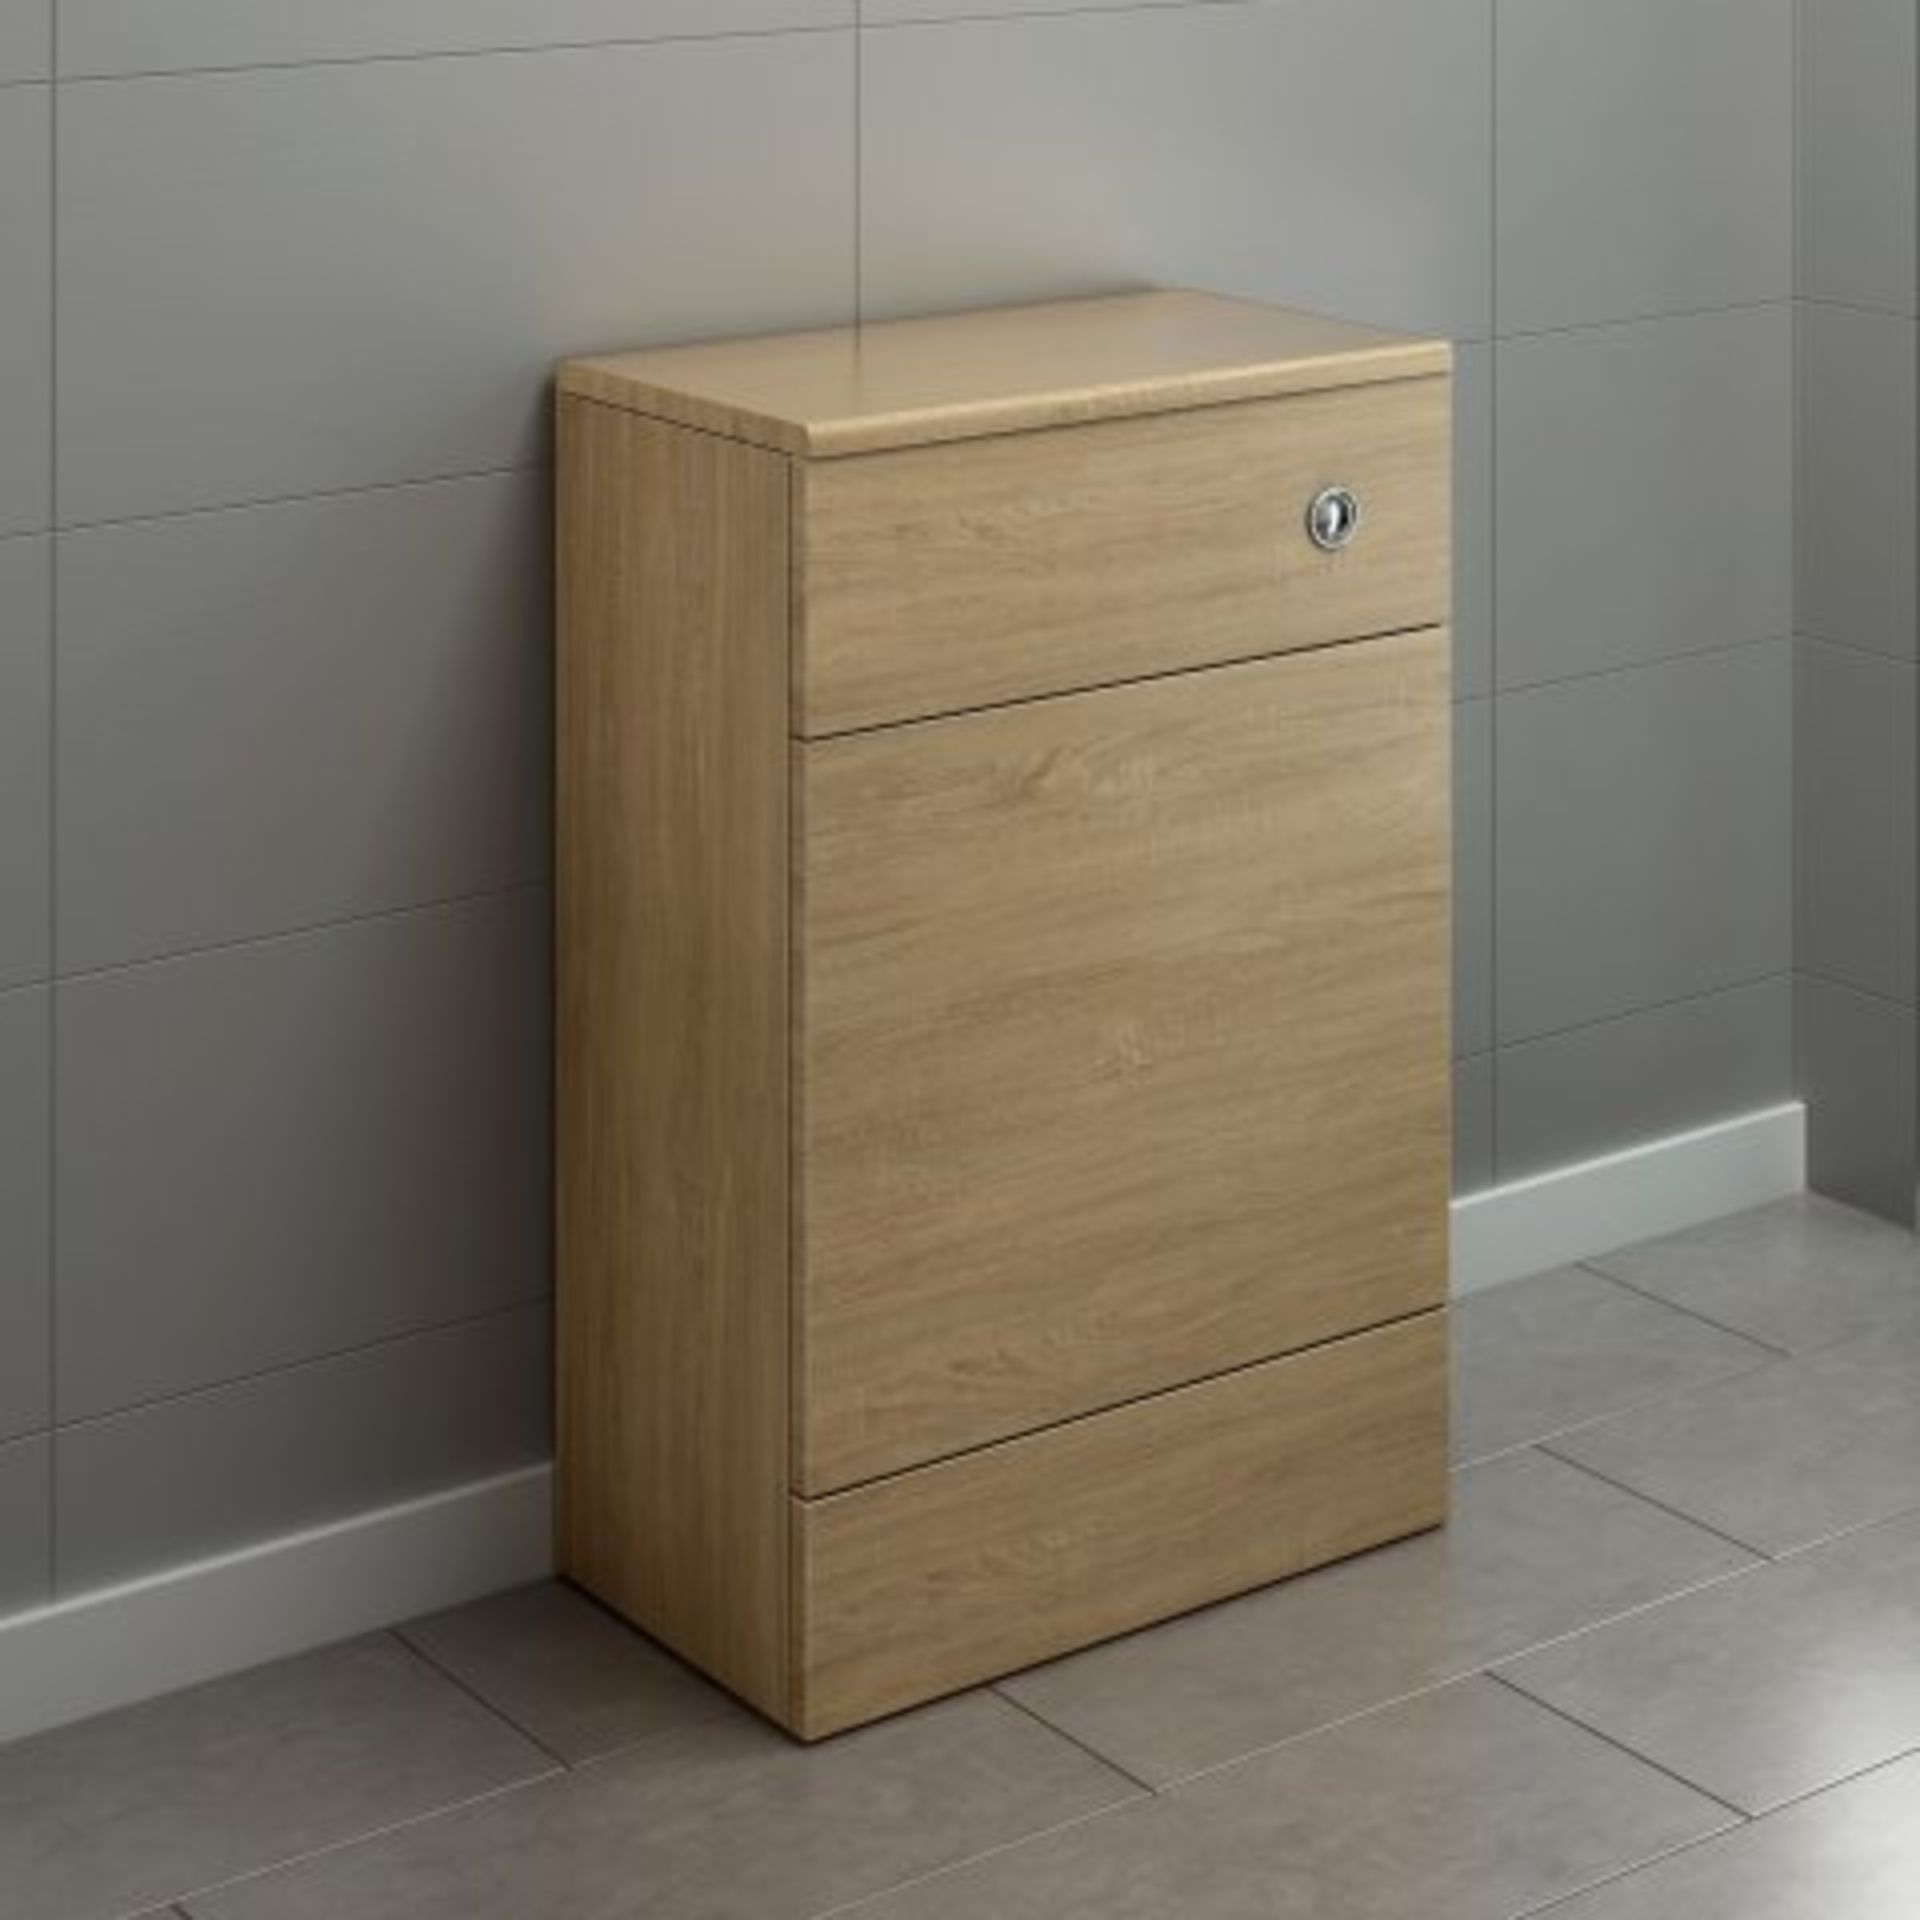 (I138) 500mm Harper Oak Effect Back To Wall Toilet Unit. RRP £138.99. This beautifully produced